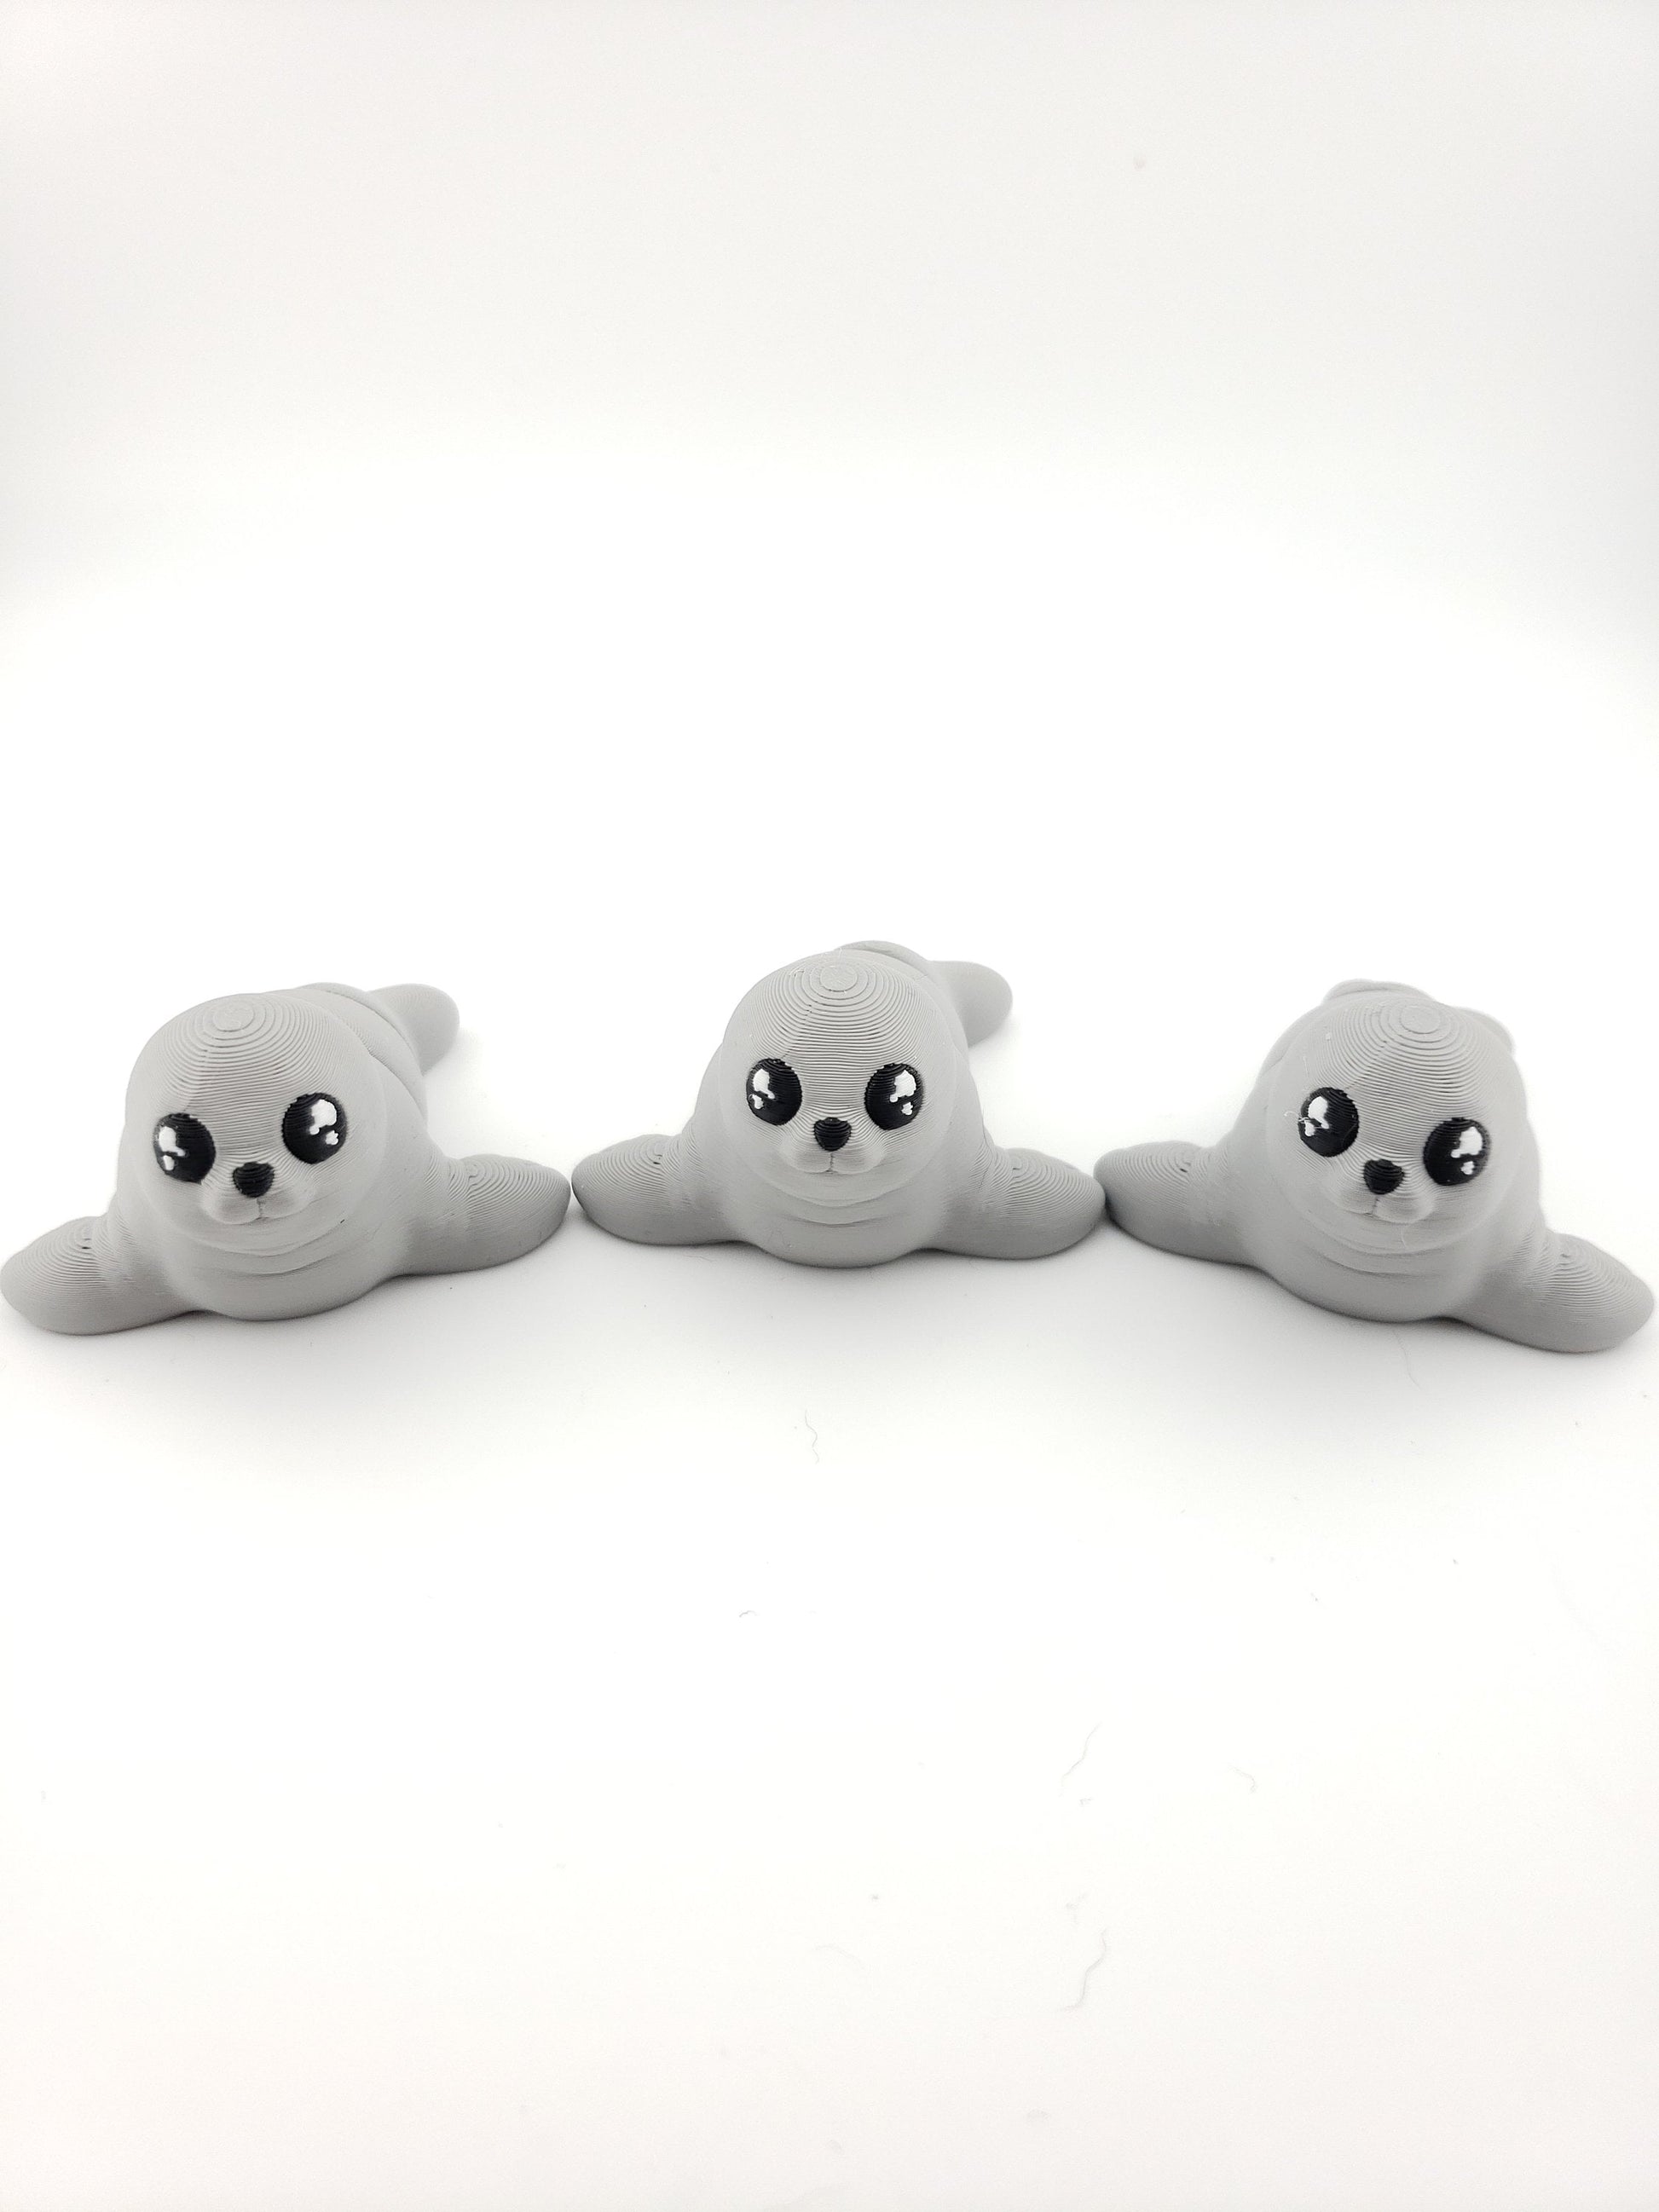 1 Articulated Painted Baby Seal - 3D Printed Fidget Fantasy Creature - Customizable Colors - Zou 3d